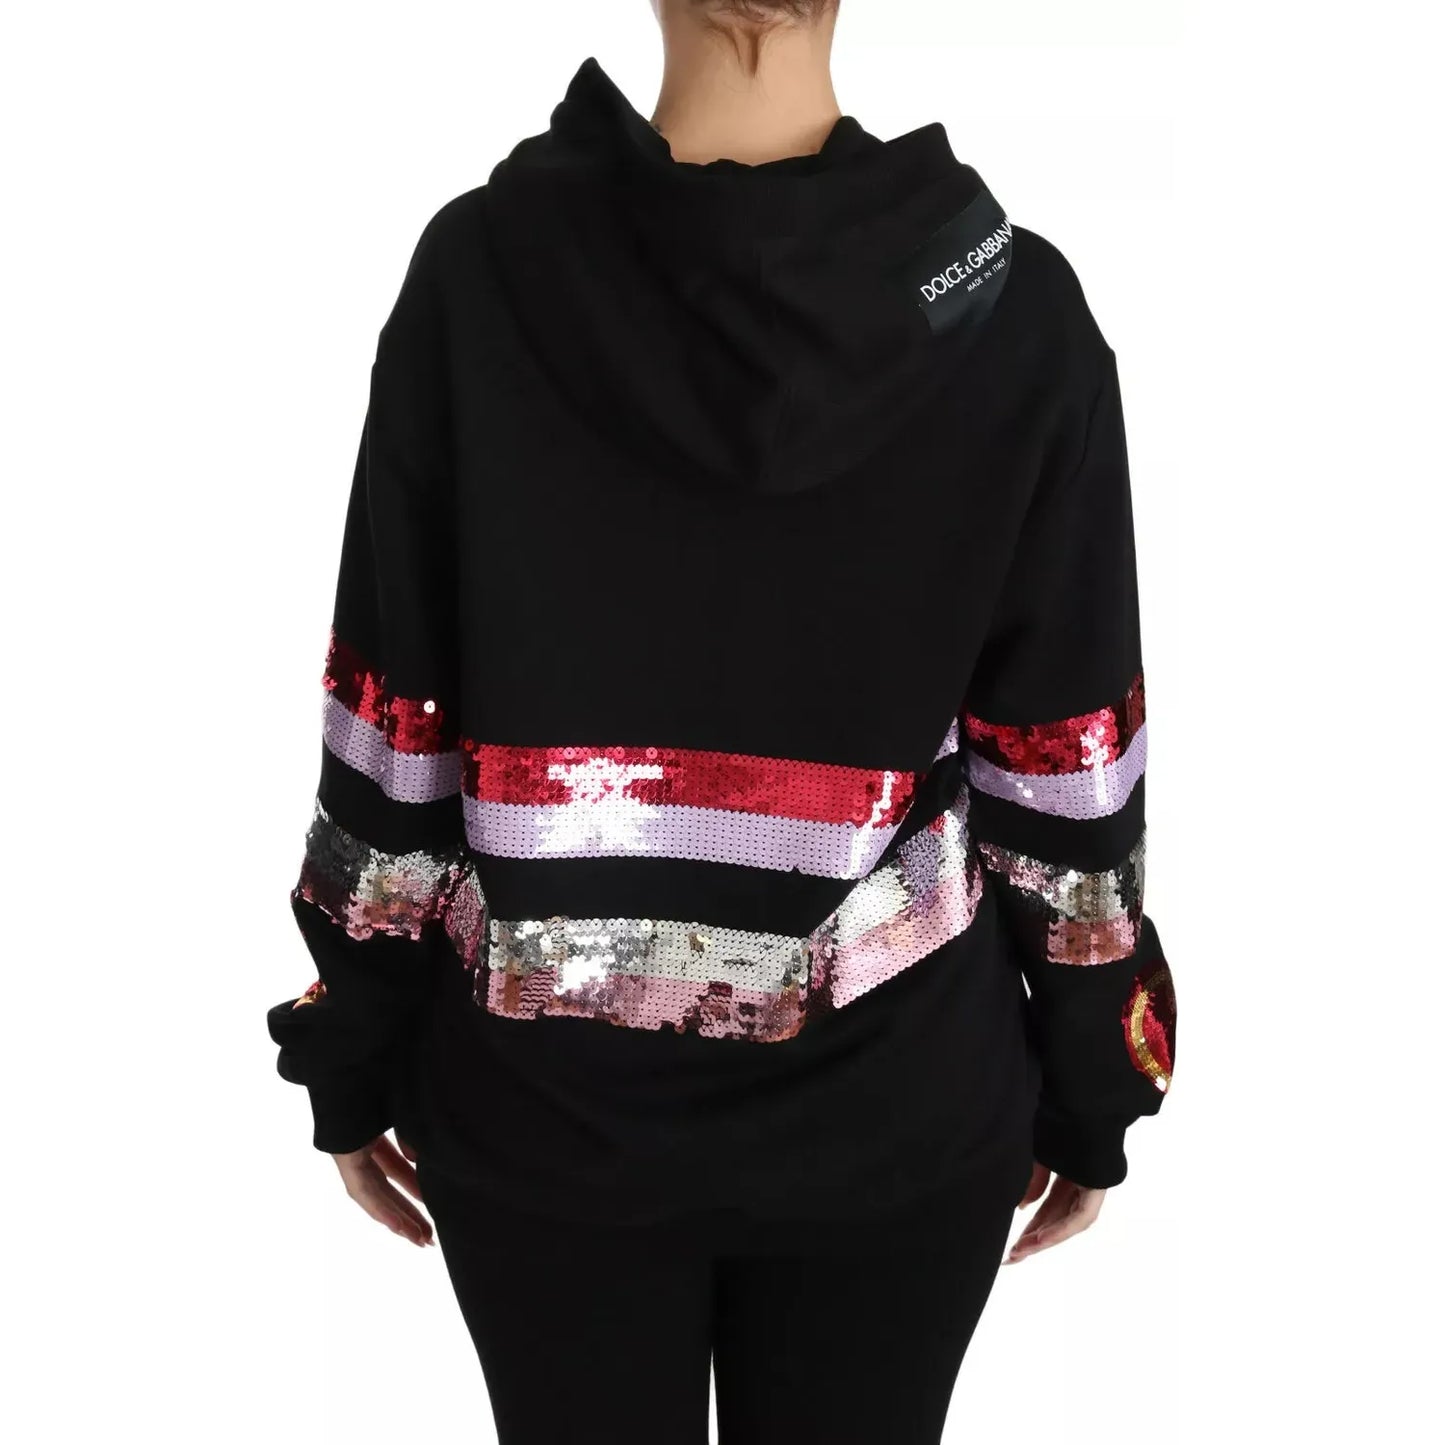 Dolce & Gabbana DG Sequined Hooded Pullover Sweater dg-sequined-hooded-pullover-sweater-2